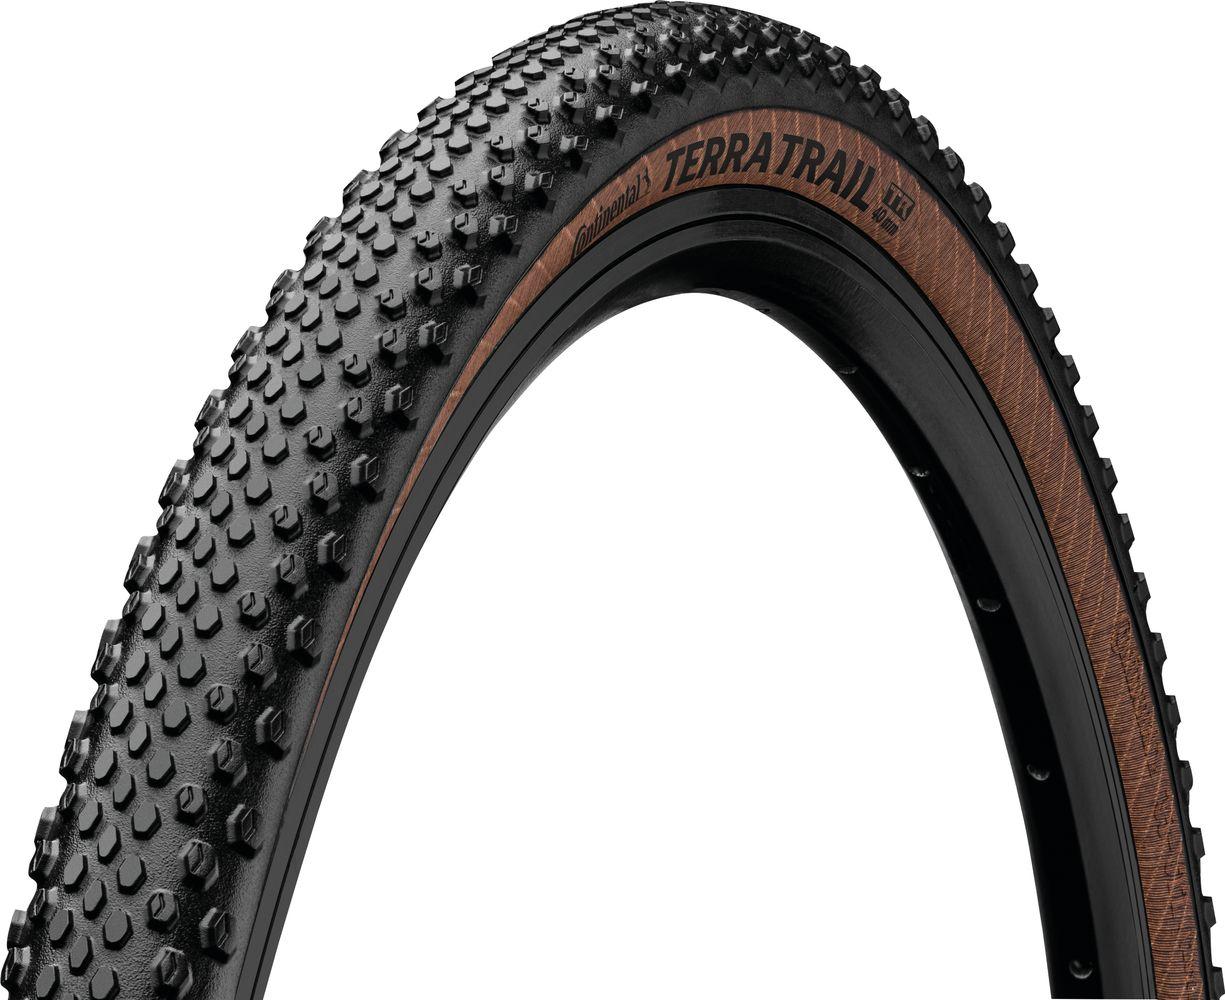 Continental Terra Trail Folding Tl Tyre (protection) - Black/transparent